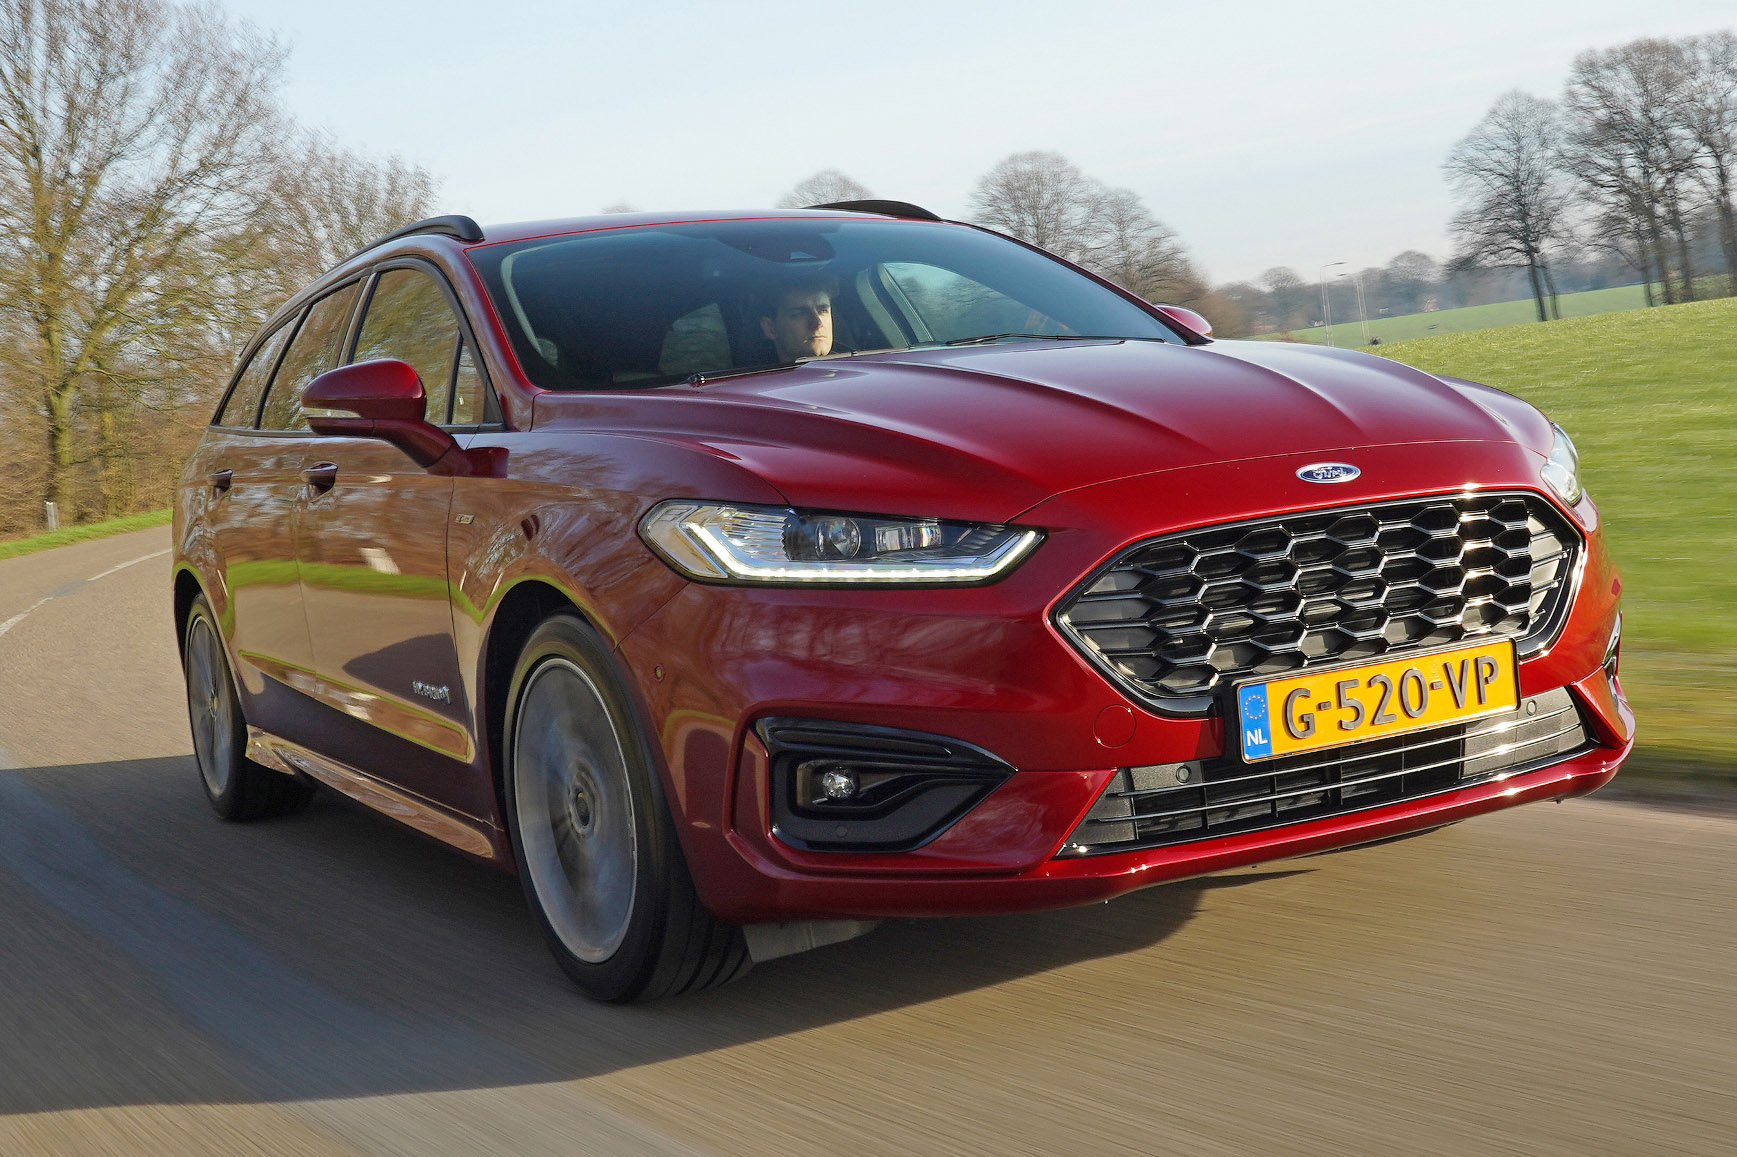 Ford Mondeo Production For Europe Ends After Nearly 30 Years